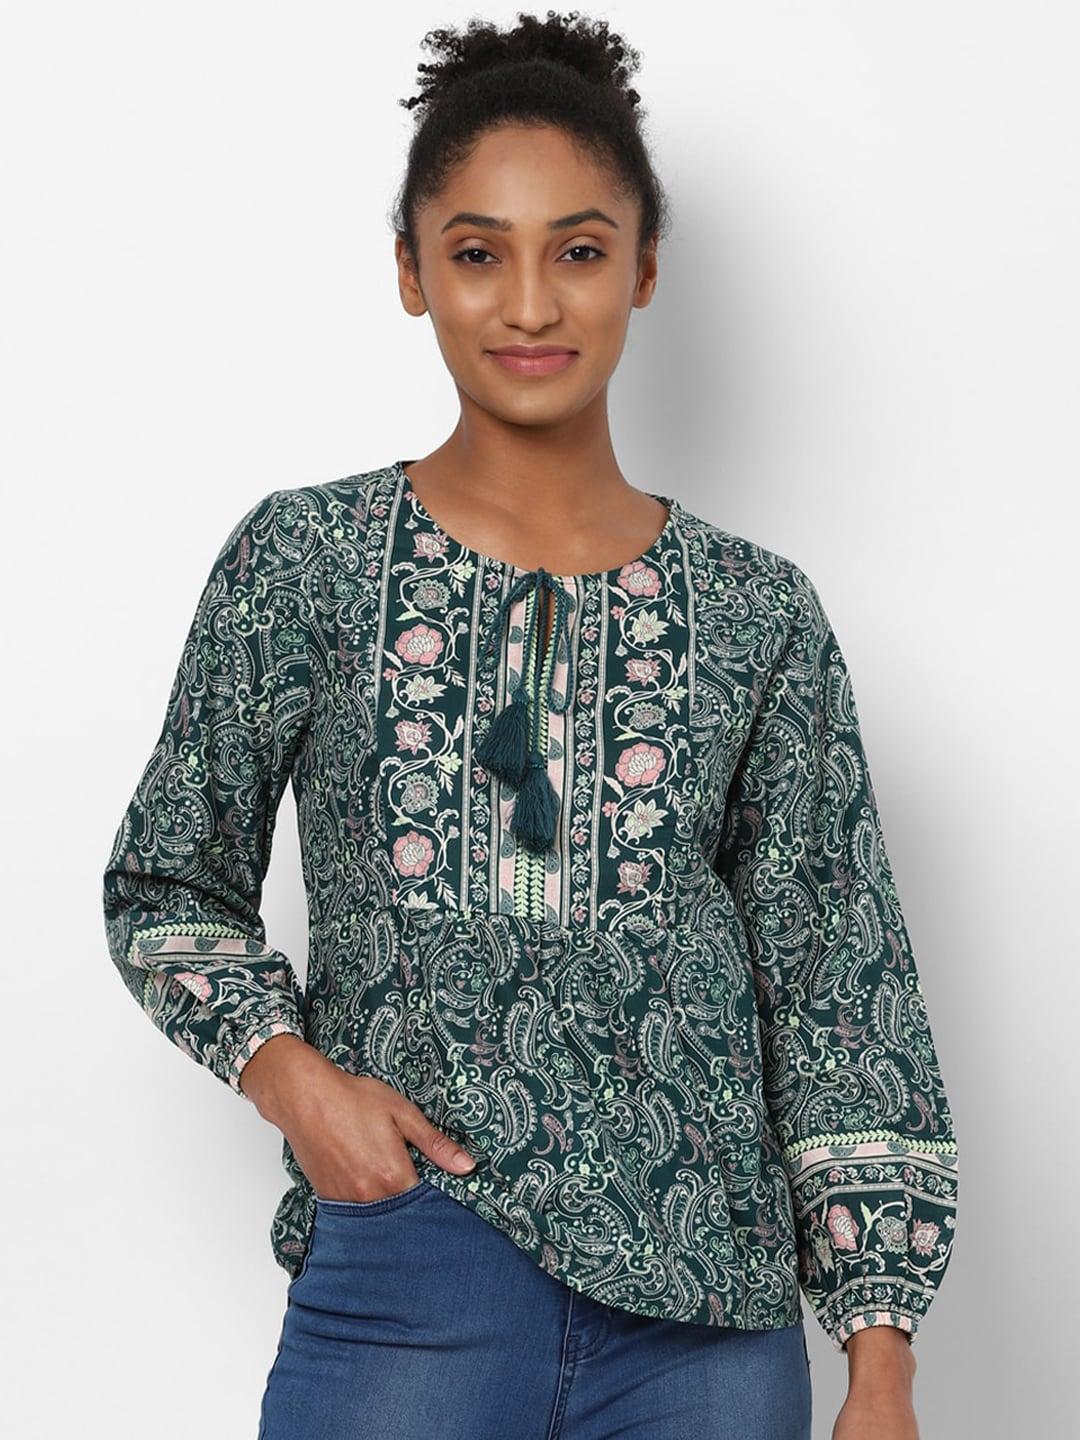 allen-solly-woman-green-floral-print-tie-up-neck-pure-cotton-top